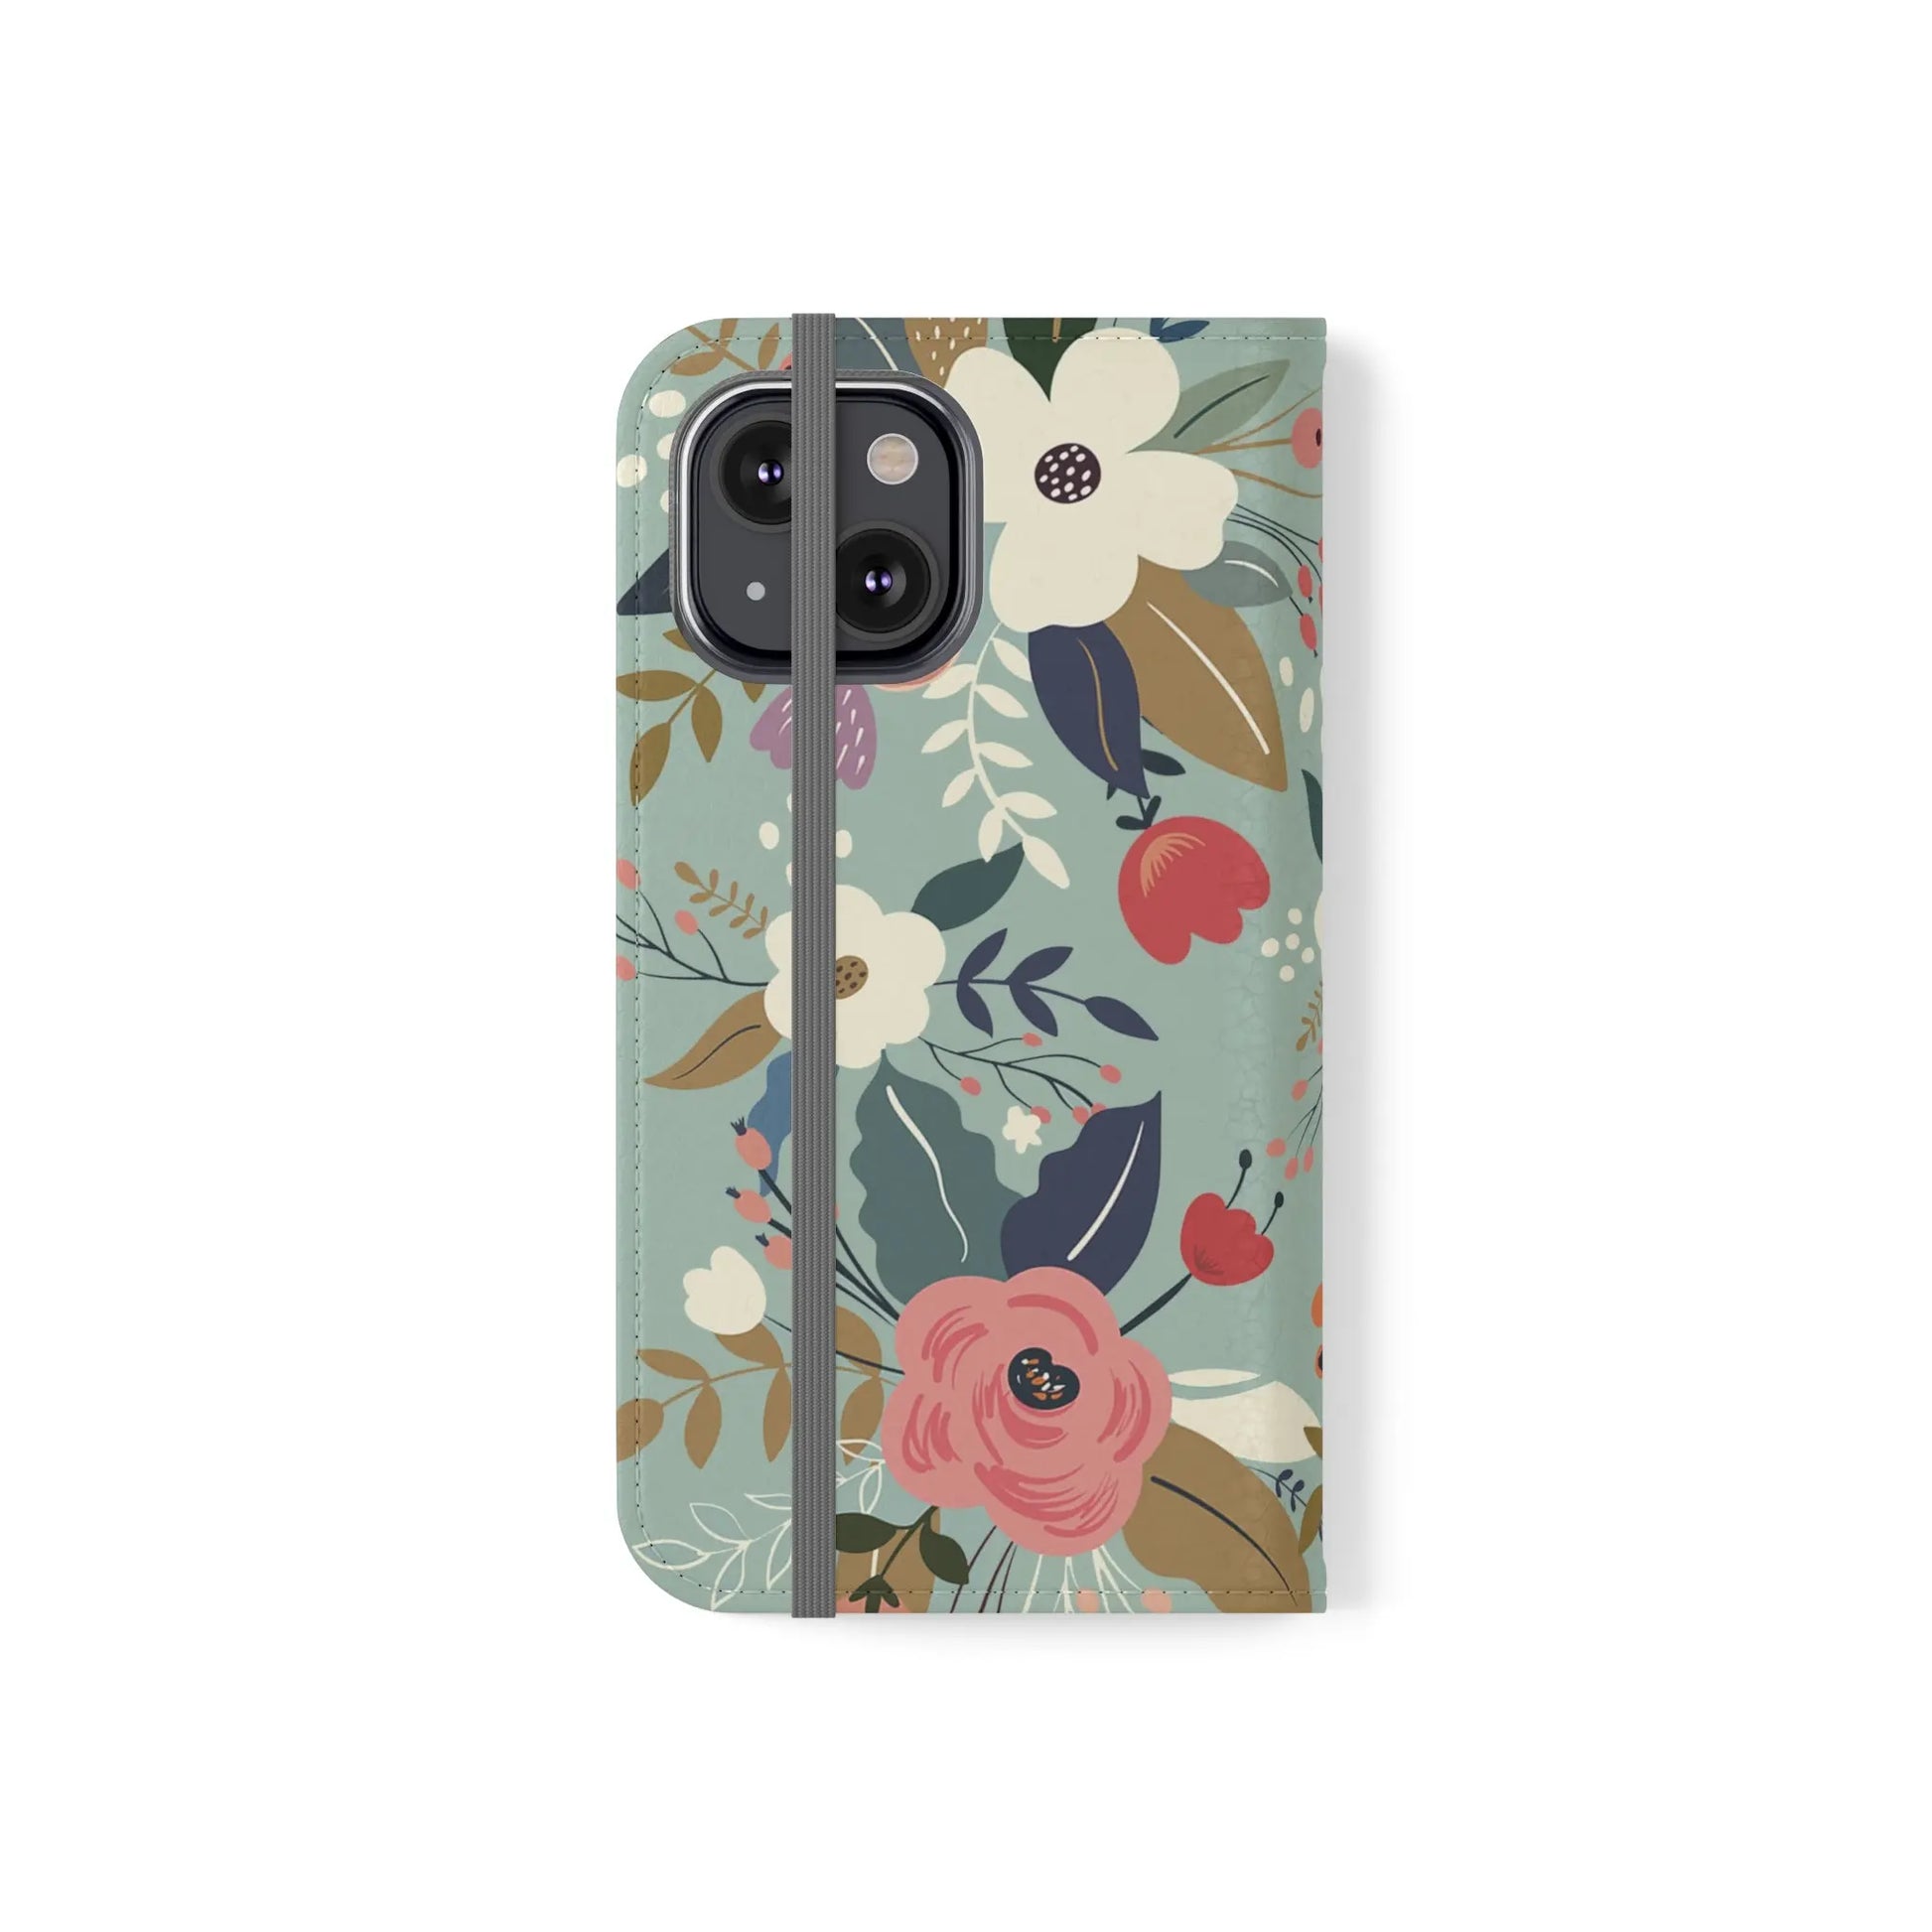 Whatever is Lovely Floral Flip Phone Case Printify